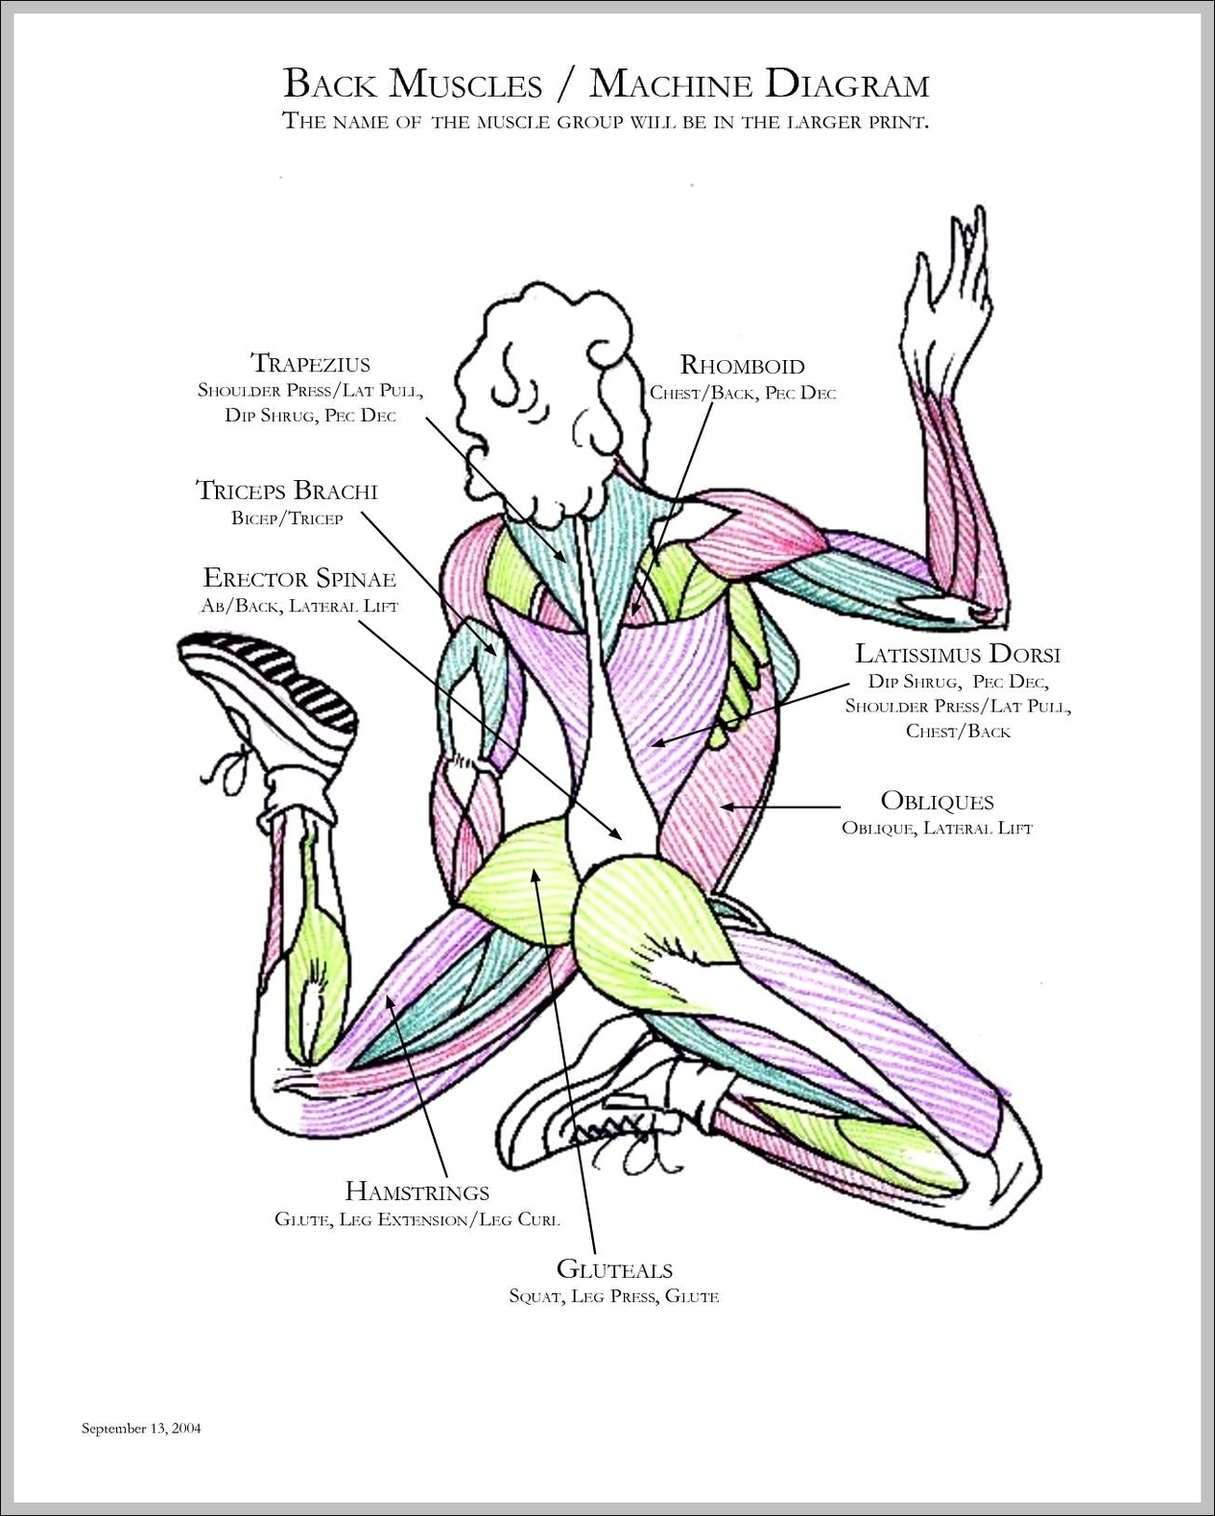 Muscles In Back Diagram Image